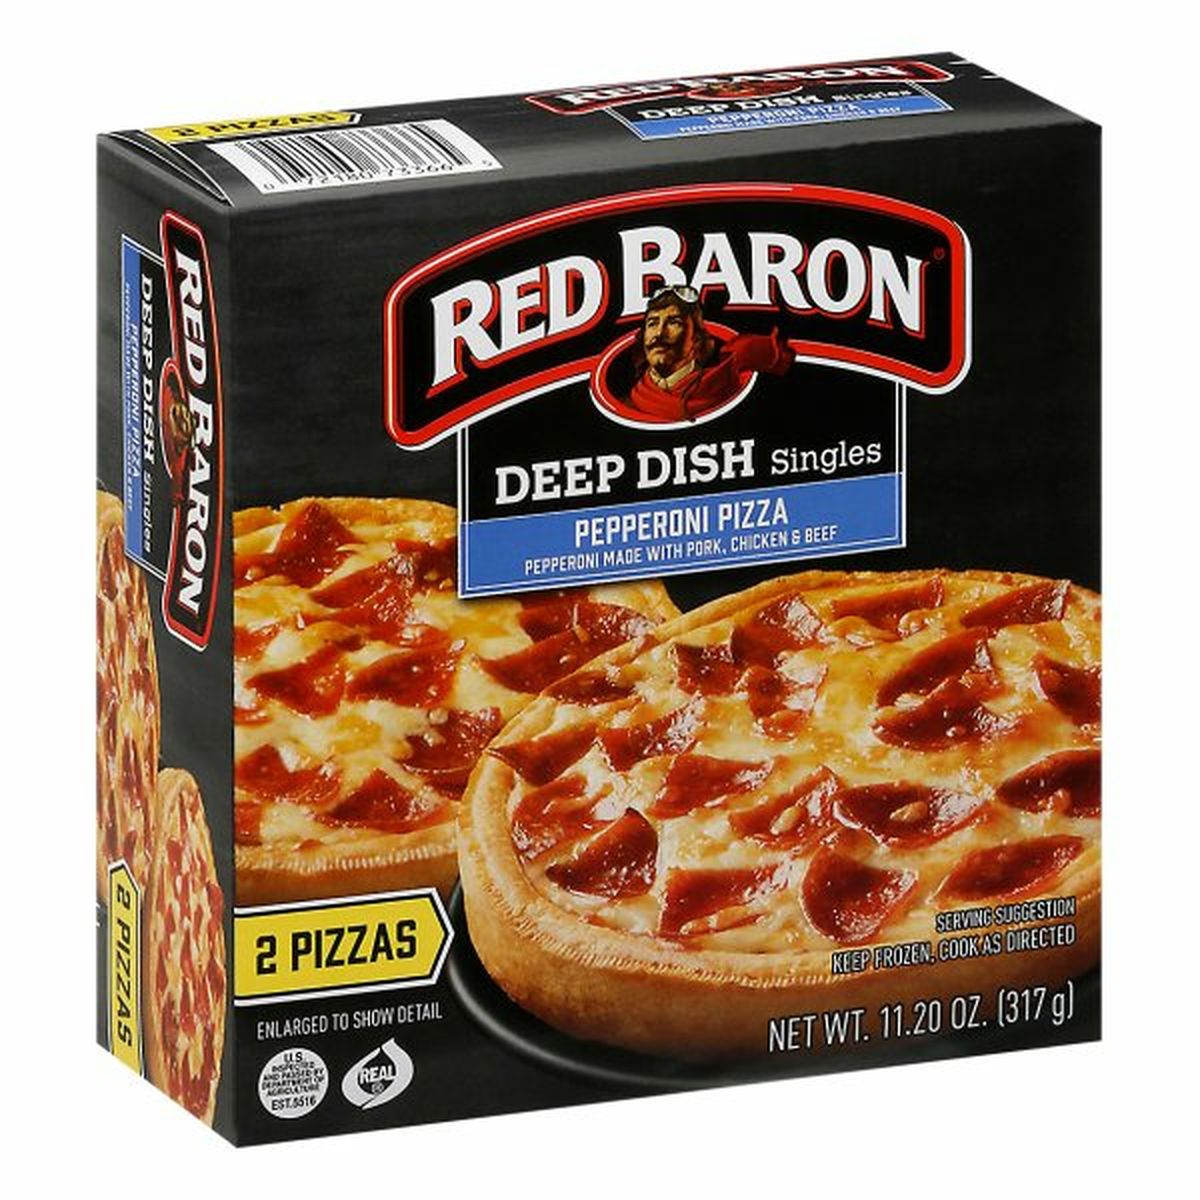 Calories in Red Baron Pizzas, Pepperoni, Deep Dish Singles